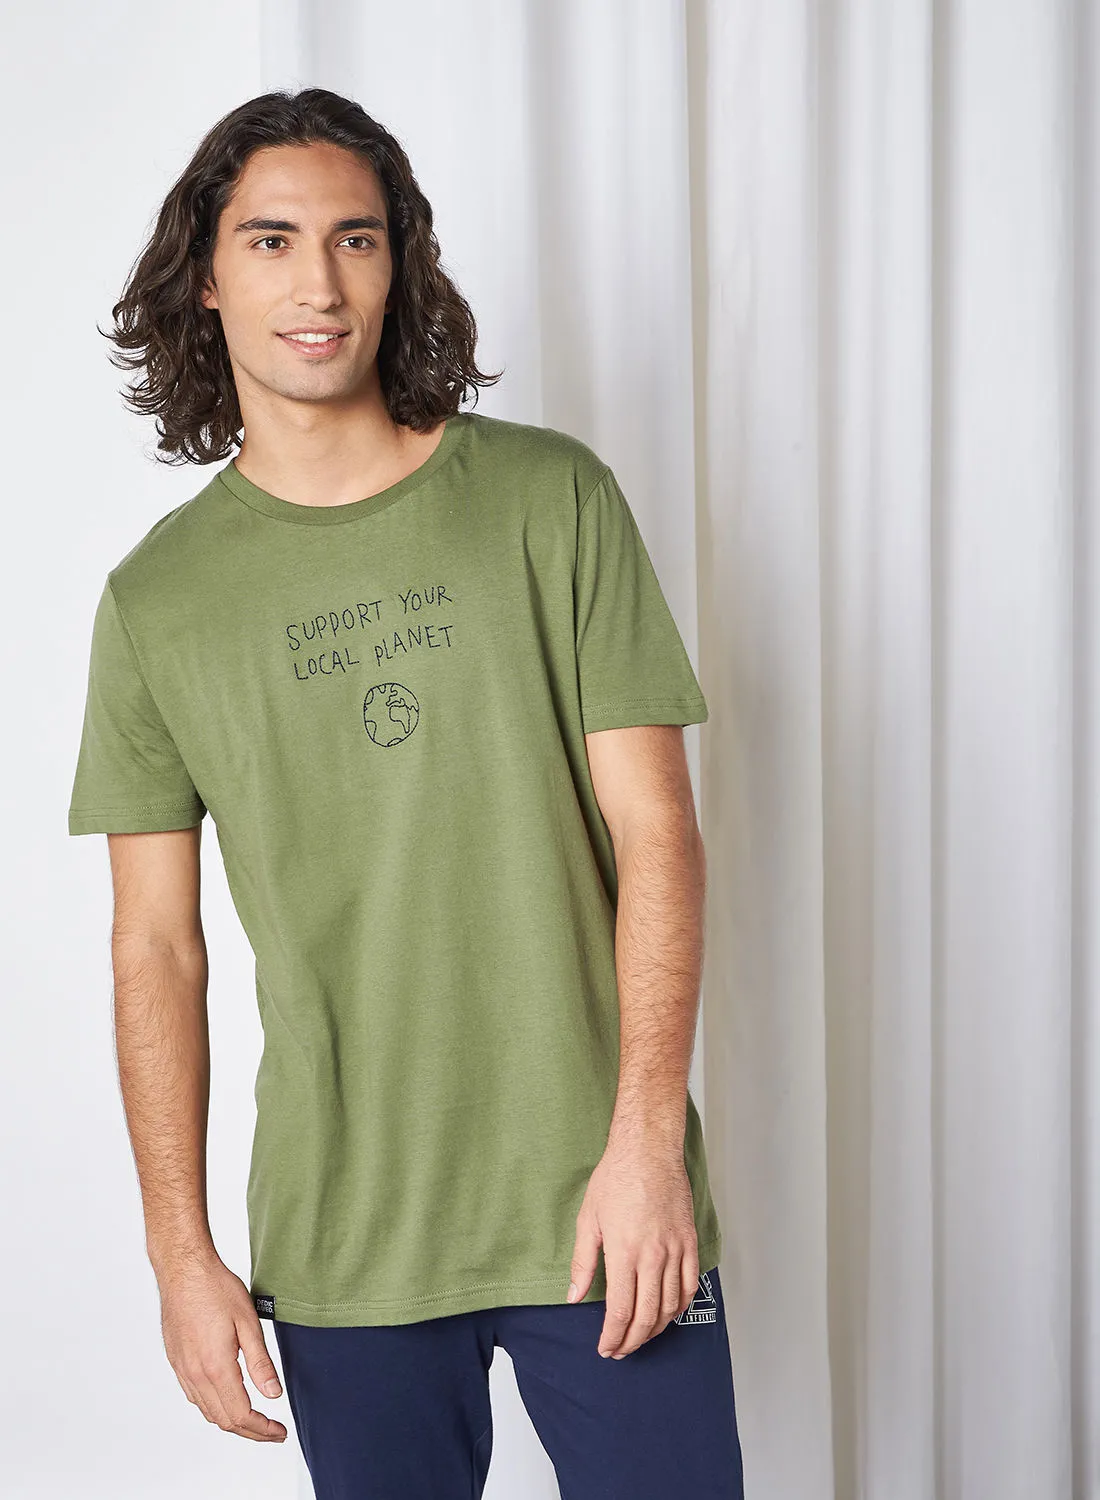 DEDICATED Support Your Local Planet Print Short Sleeve T-Shirt Leaf Green